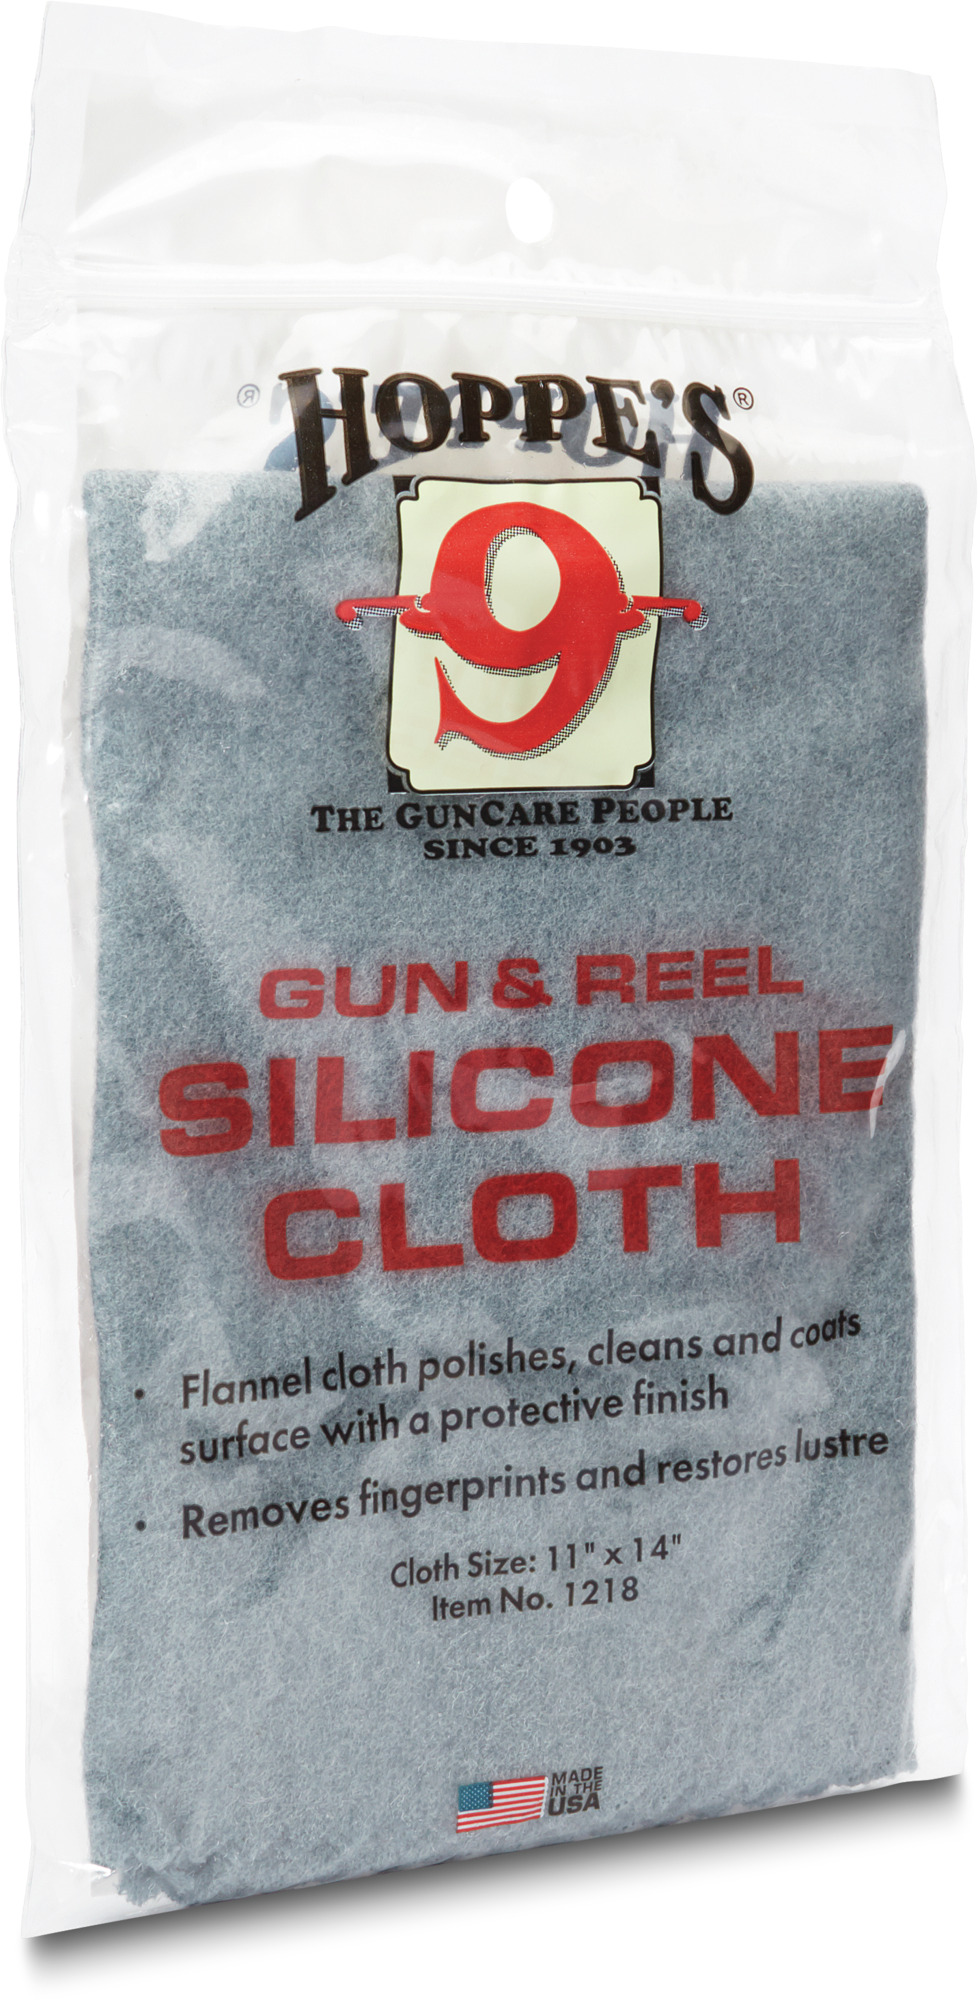 G-96 Silicone Gun & Reel Cloth Triple Treated To Absorb/Hold Dirt Cleans 